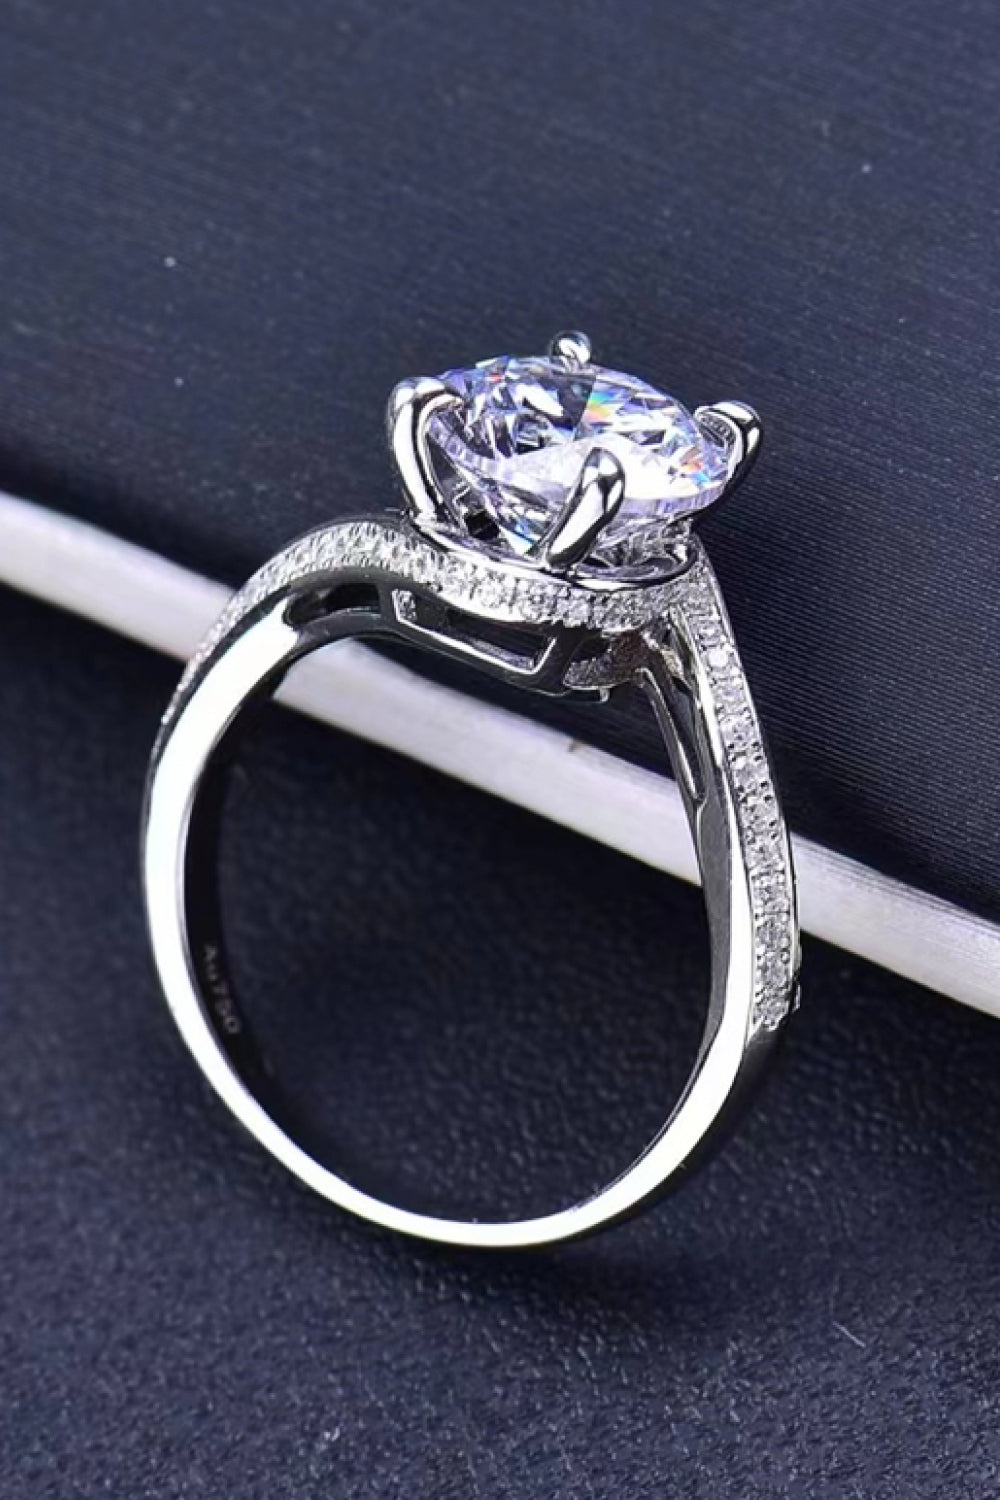 Keep Your Eyes On Me 3 Carat Moissanite Ring - Tophatter Deals